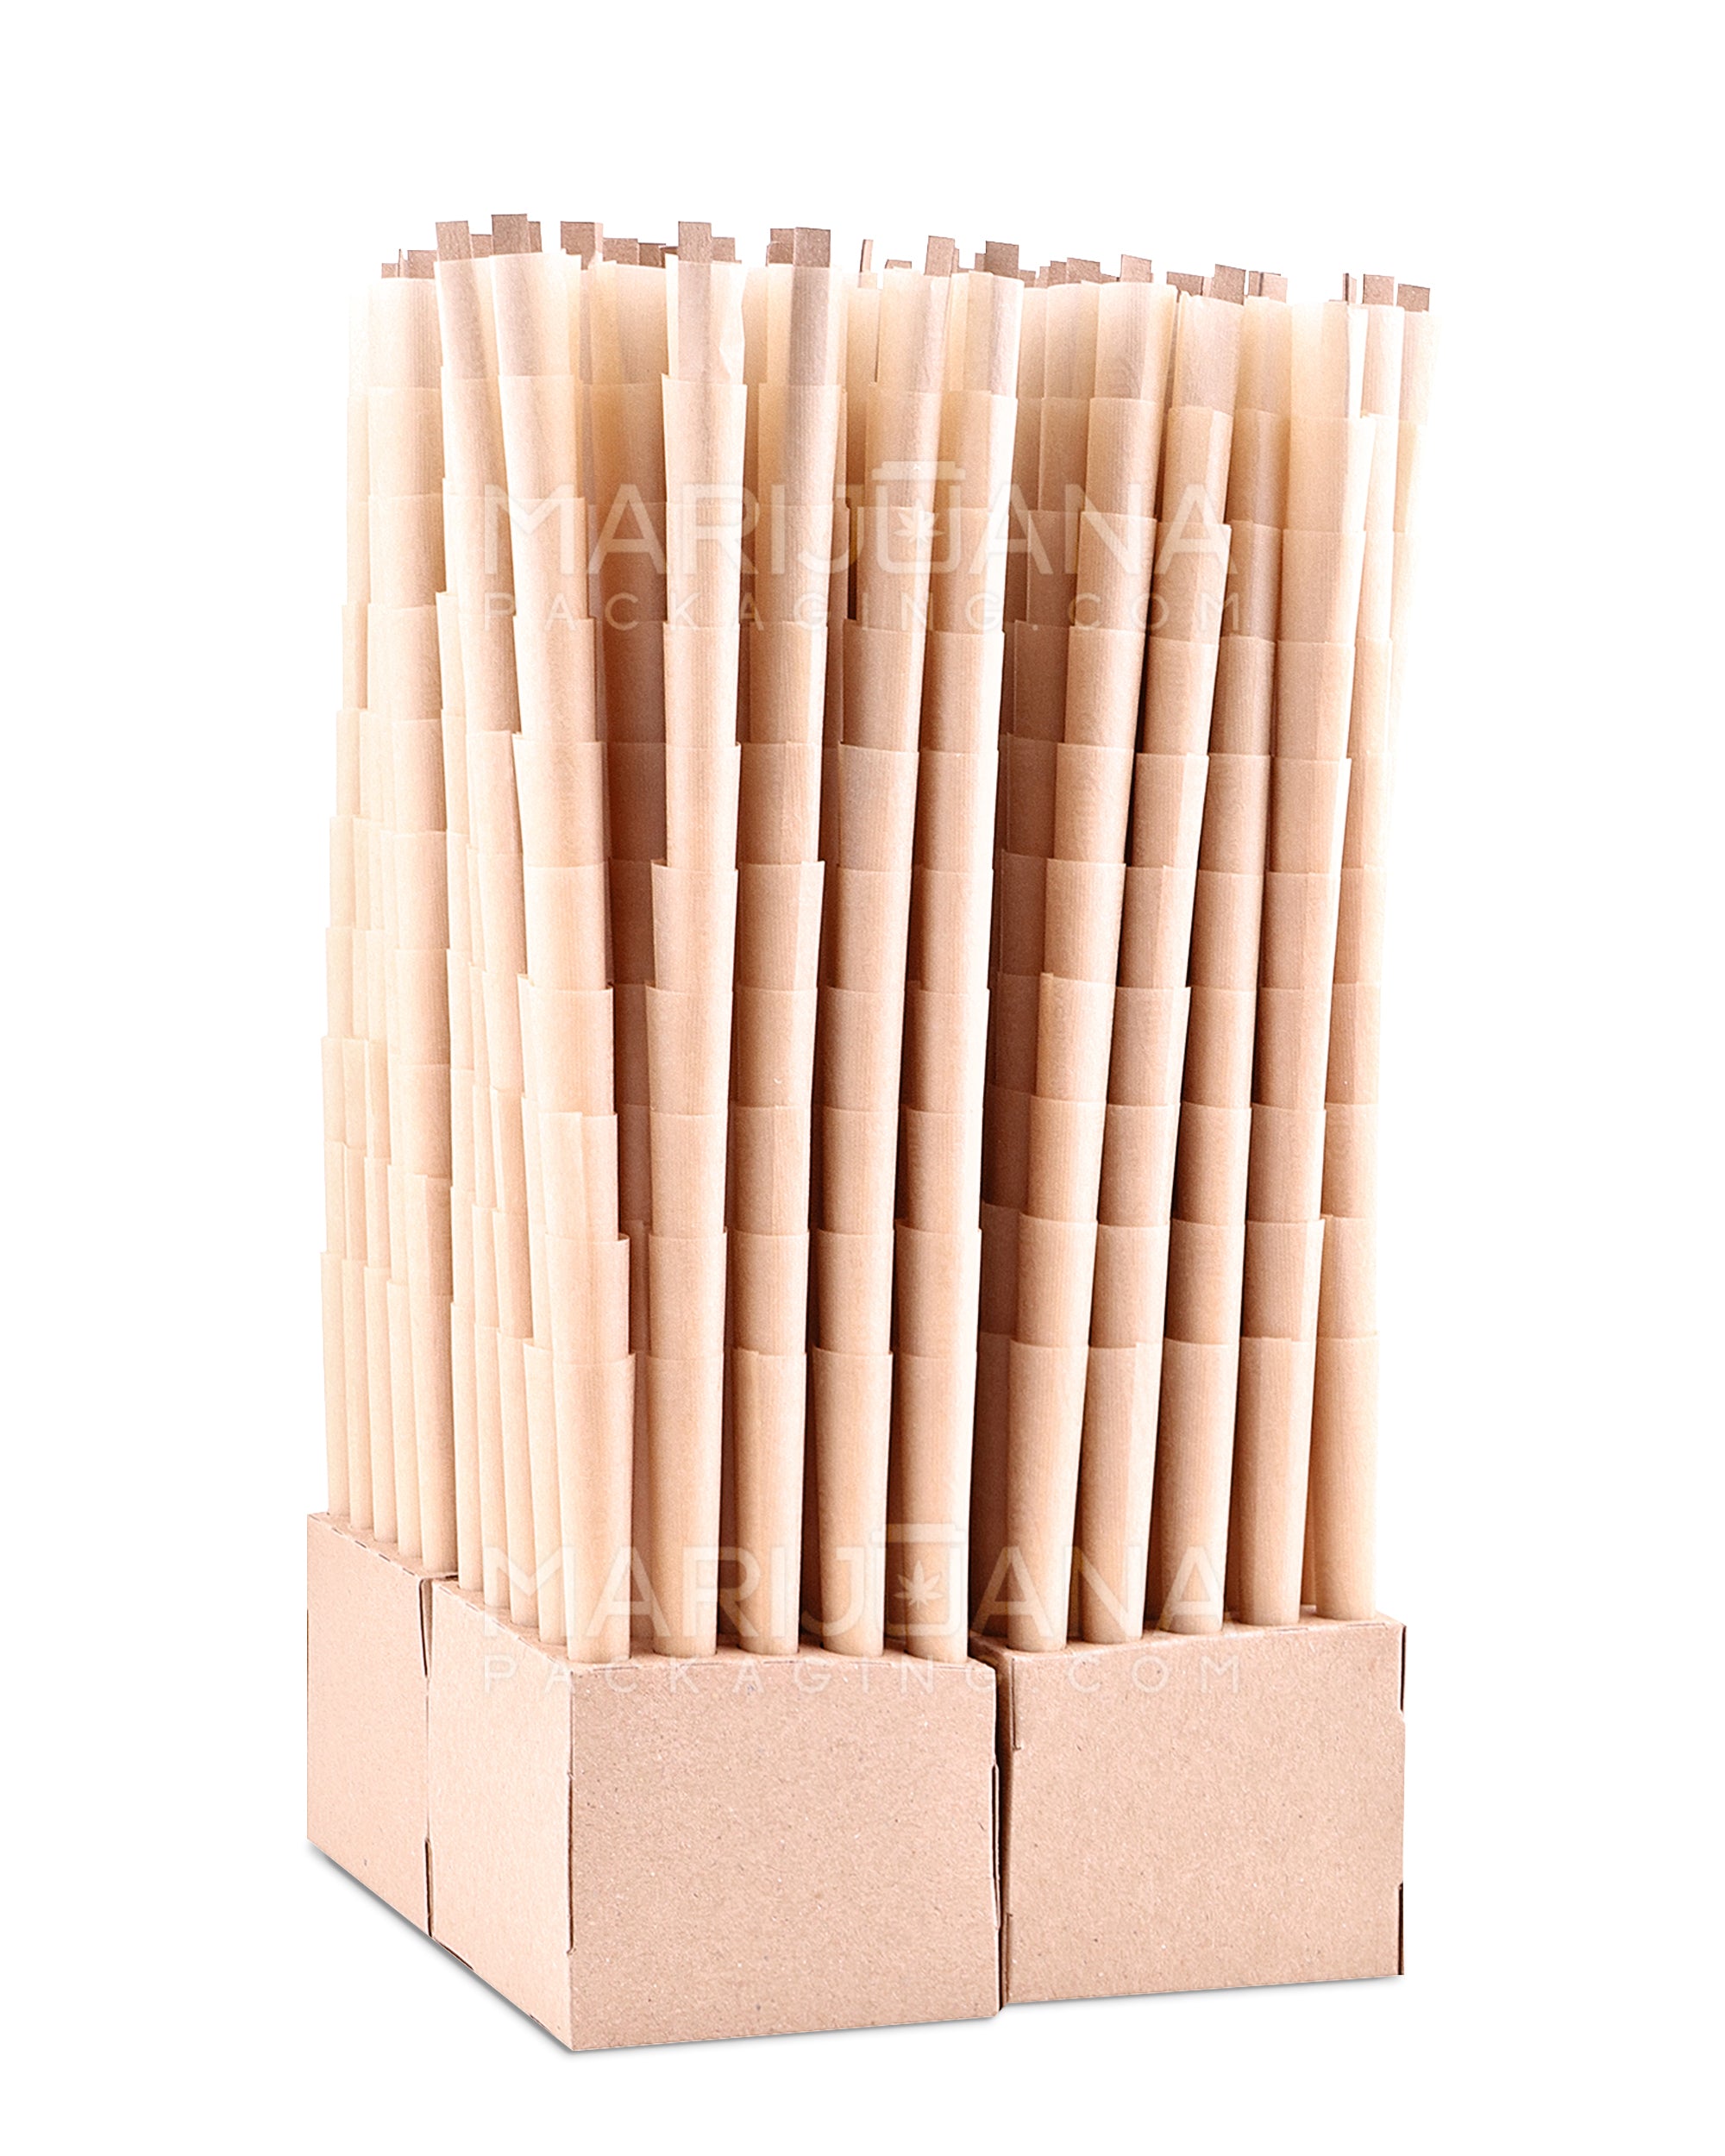 CONES | King Size Pre-Rolled Cones | 109mm - Unbleached Paper - 1000 Count